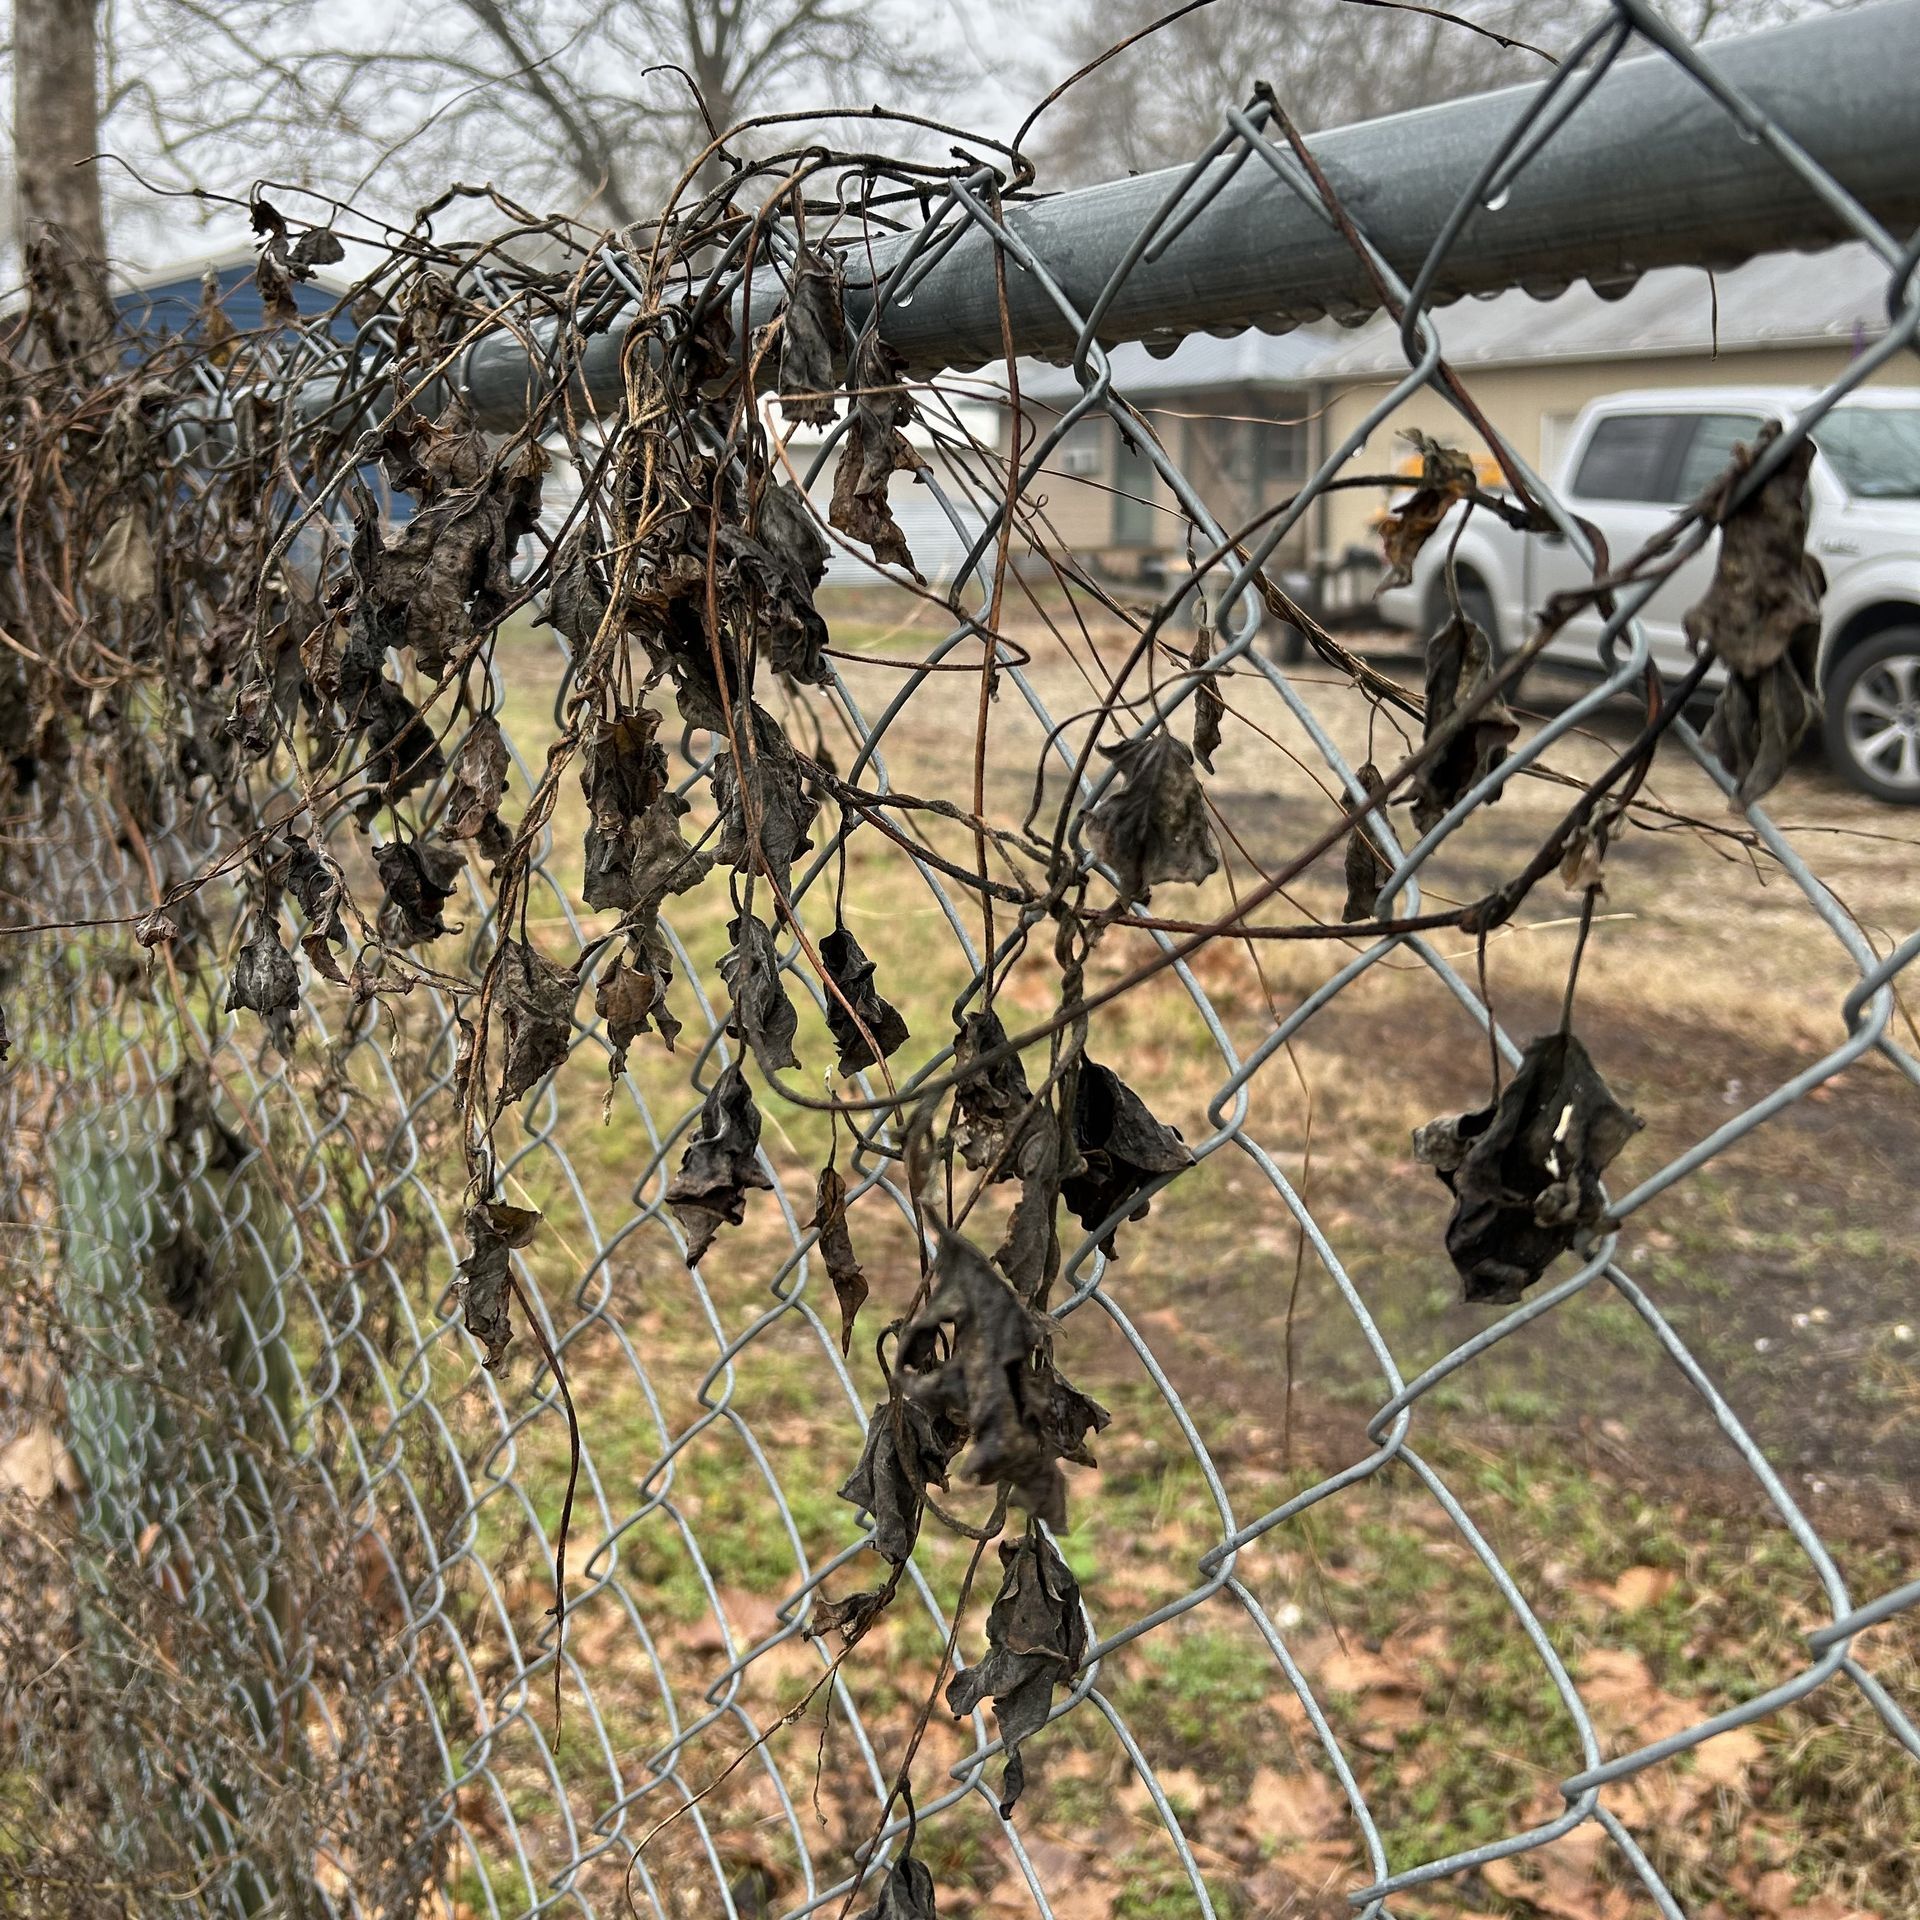 This image shows how vines that have taken over a fence were quickly killed off by a freeze